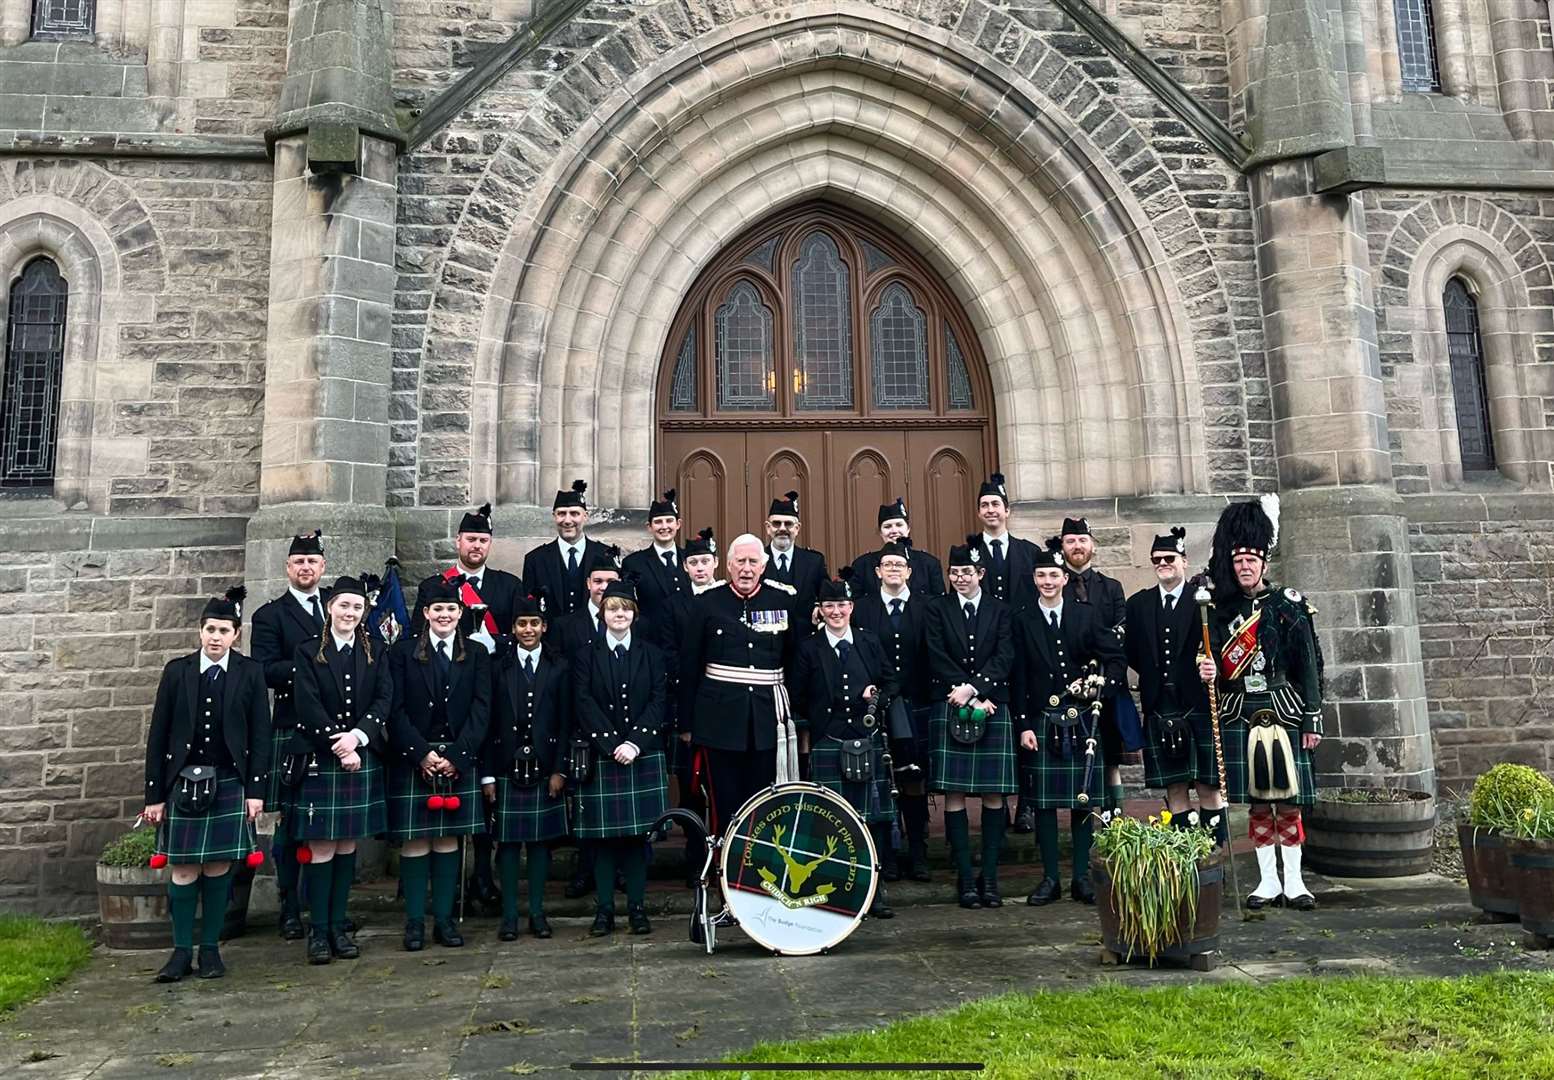 Forres and District Pipe Band with band president Lord Lieutenant Major General Seymour Monro after performing at St Laurence Church service of thanksgiving for King Charles III.